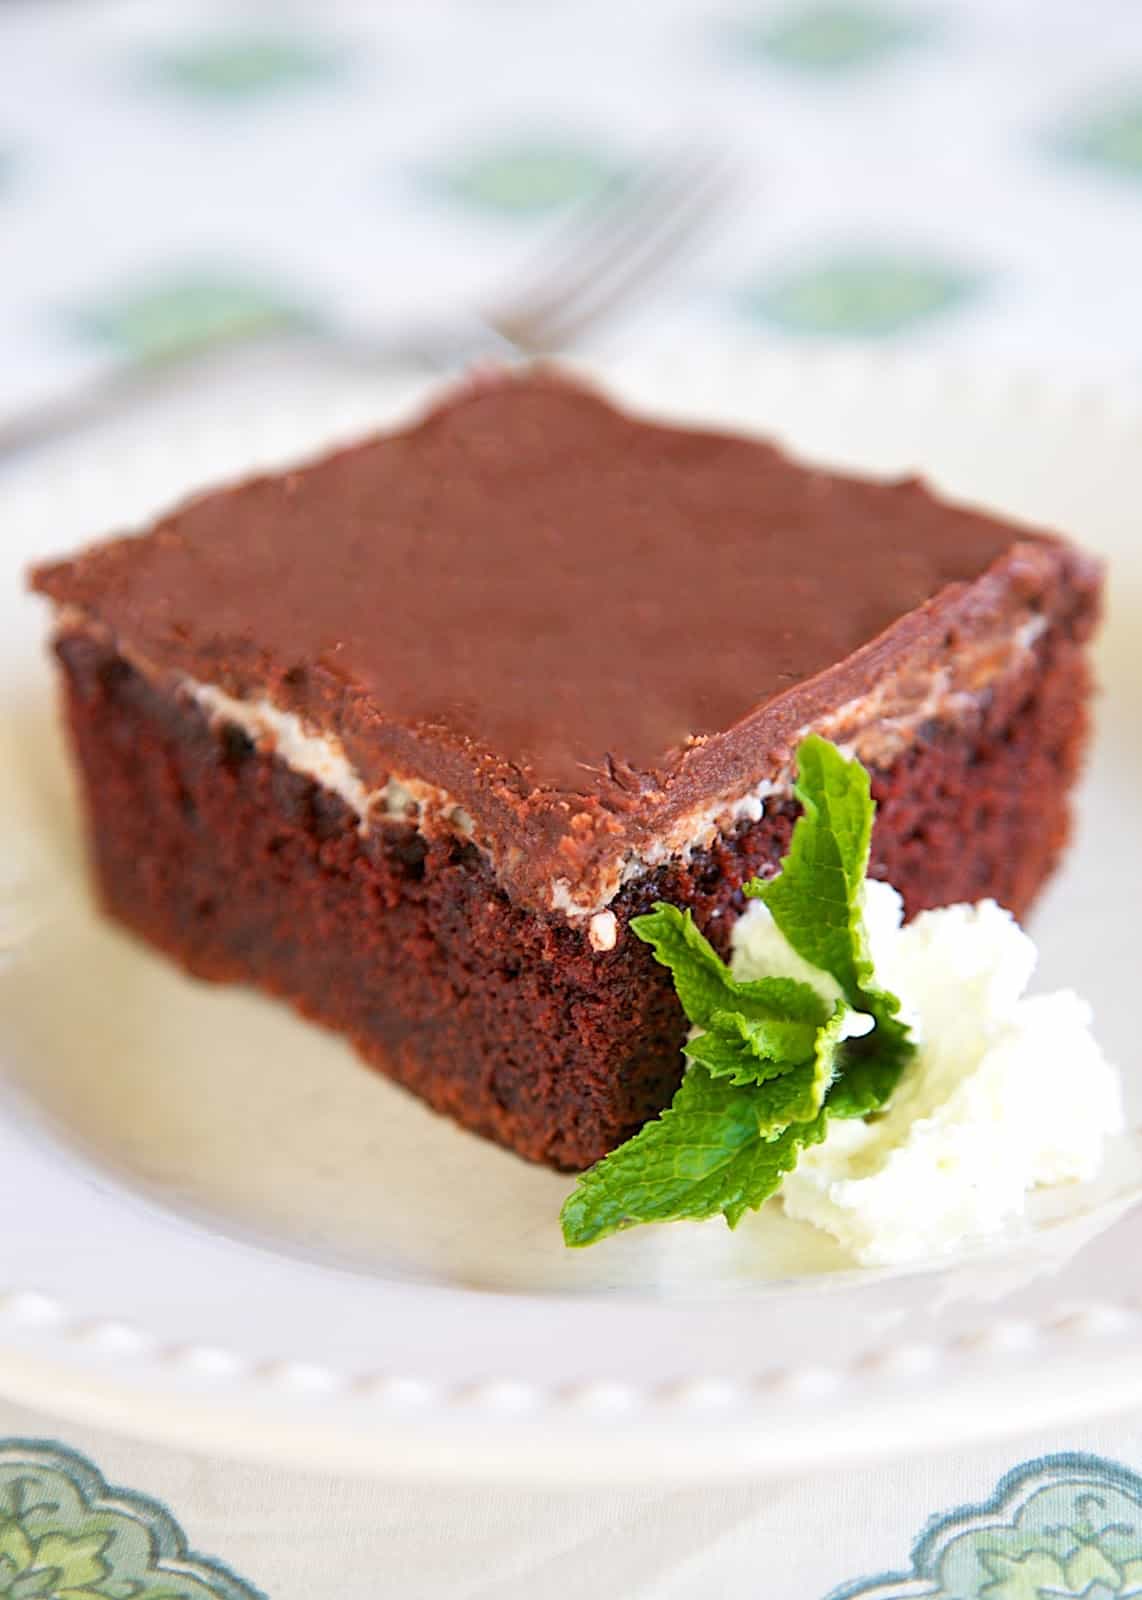 Grandma's Hint of Mint Cake Recipe - quick homemade chocolate cake, topped with Peppermint Patties and a homemade chocolate frosting. Great for a potluck dinner - super easy to transport. We like it with a scoop of vanilla ice cream!